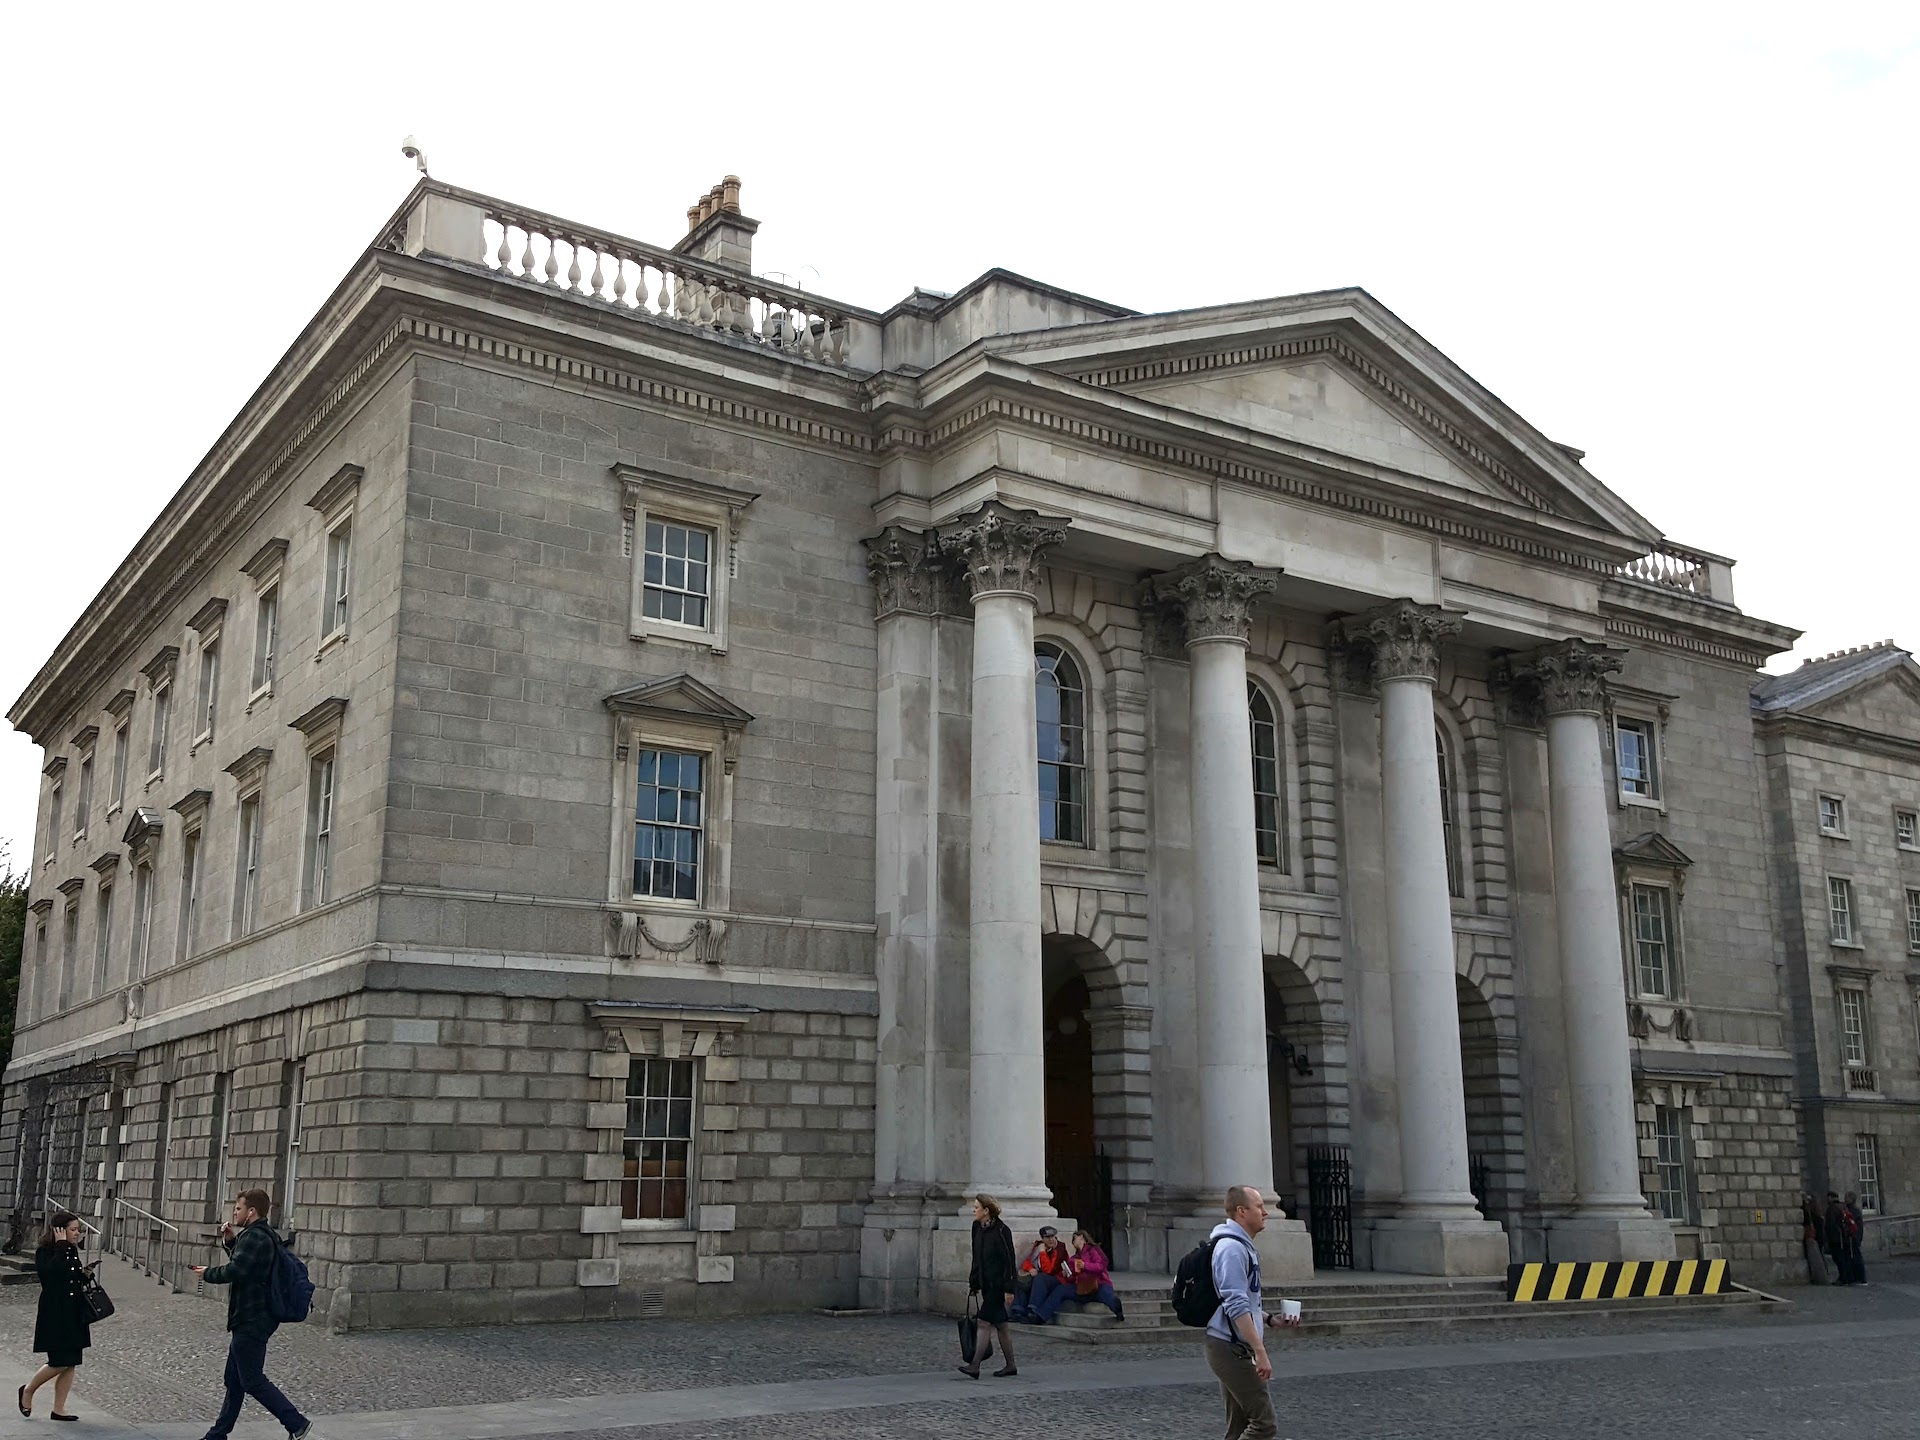 The Chapel: A Beautiful Place of Worship at the Heart of Trinity College Dublin